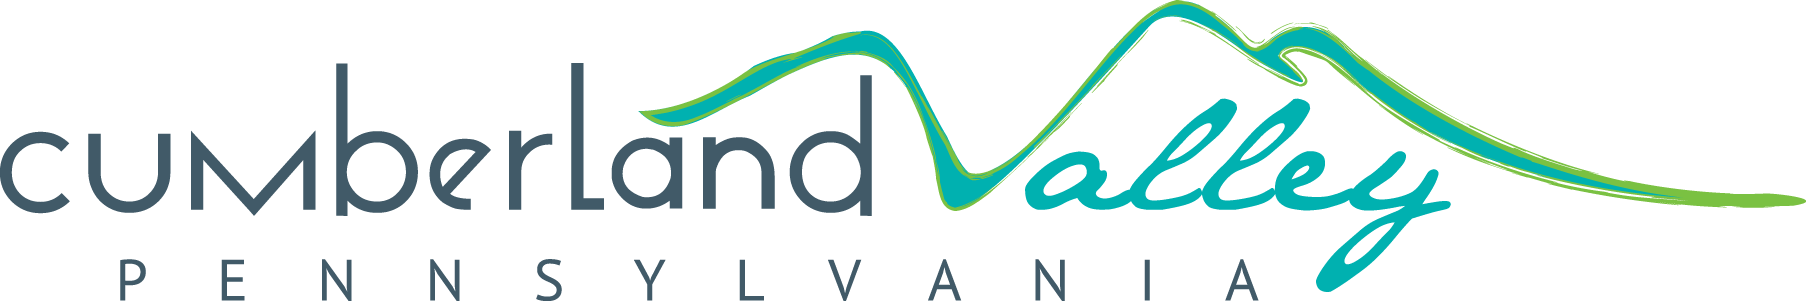 Logo of Cumberland Valley Pennsylvania with a stylized mountain range integrated into the text.